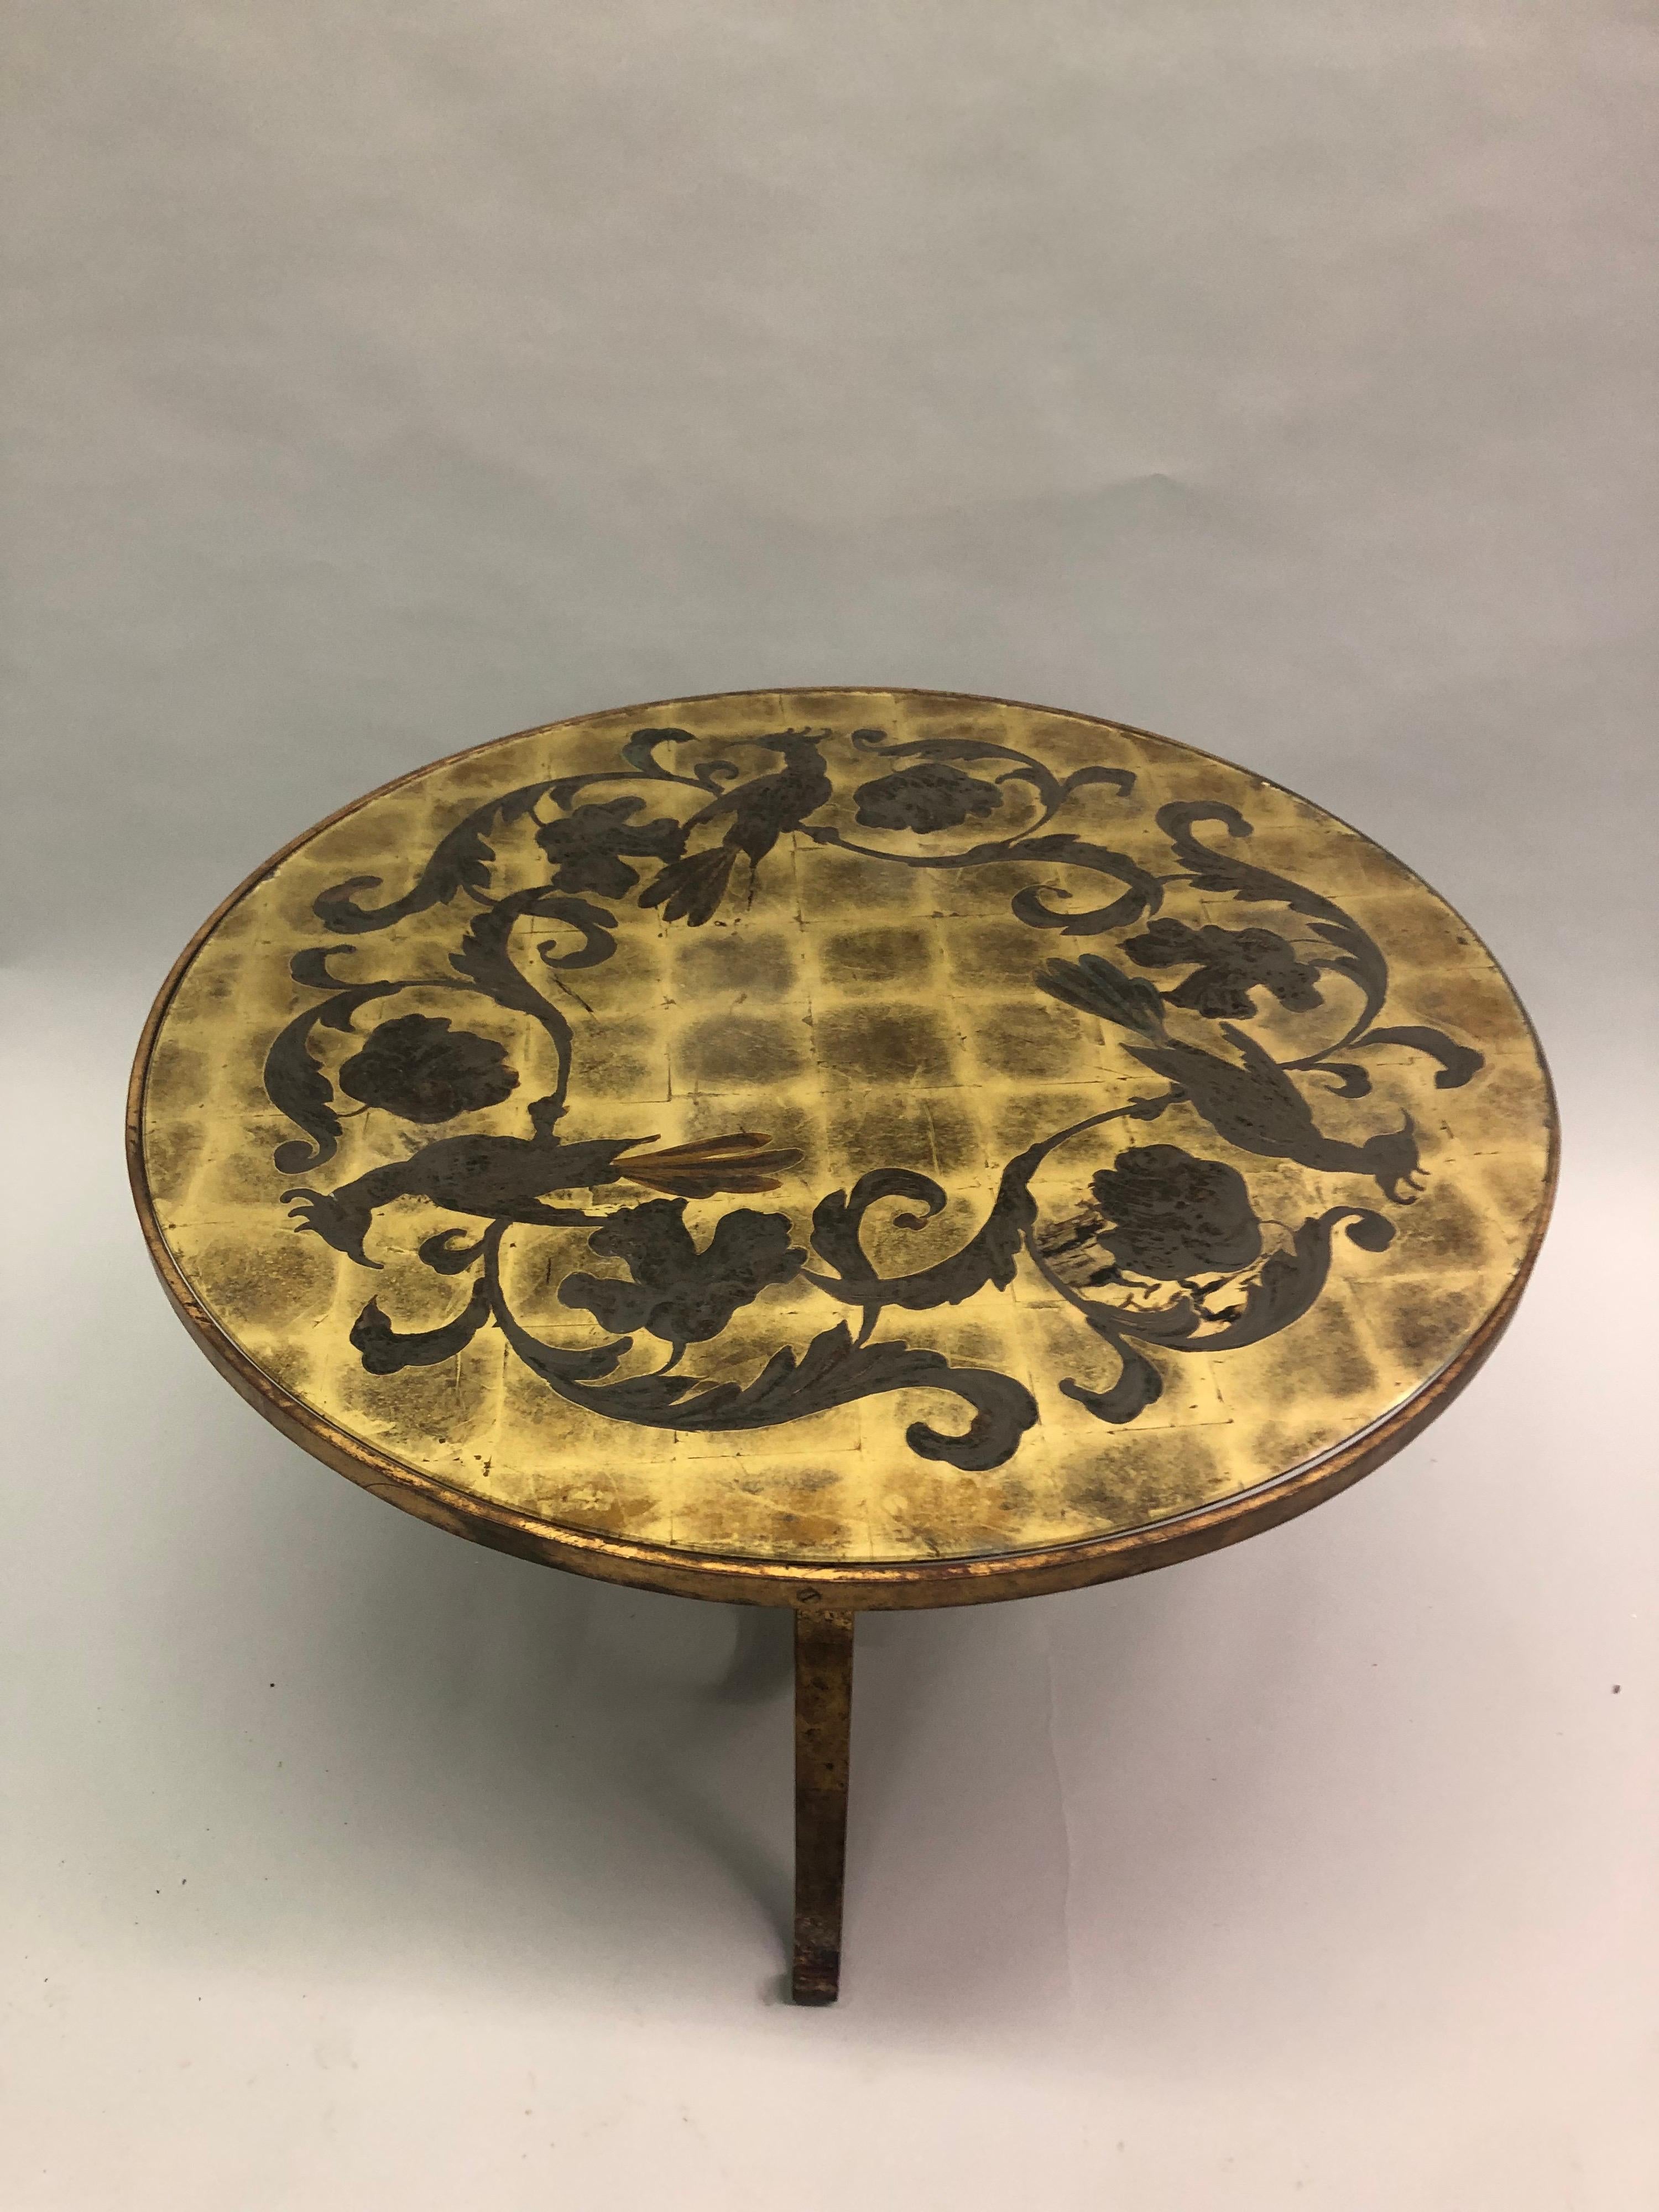 Glass French Modern Neoclassical Gilt Wrought Iron Coffee / Side Table by Rene Drouet For Sale